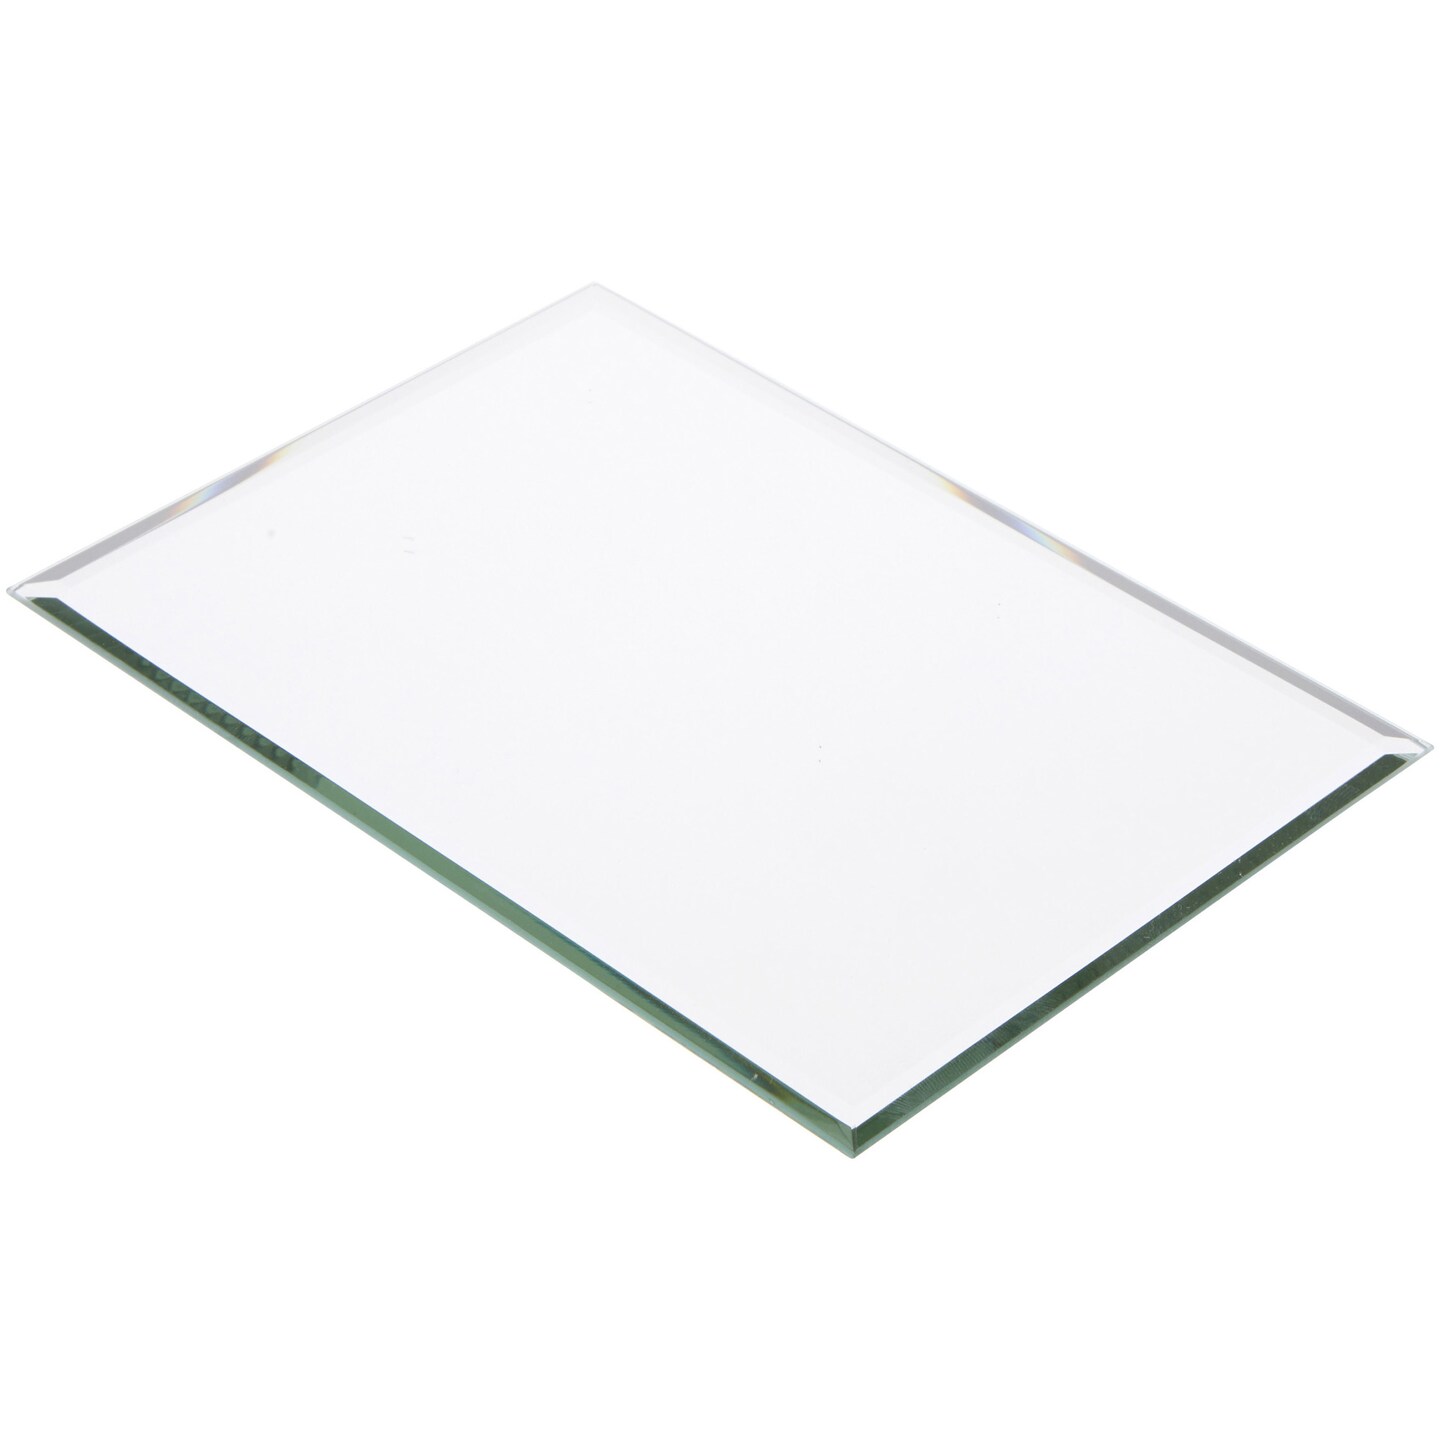 Silver Glass Mirror Tiles for Crafts, 5x5 mm Self-Adhesive